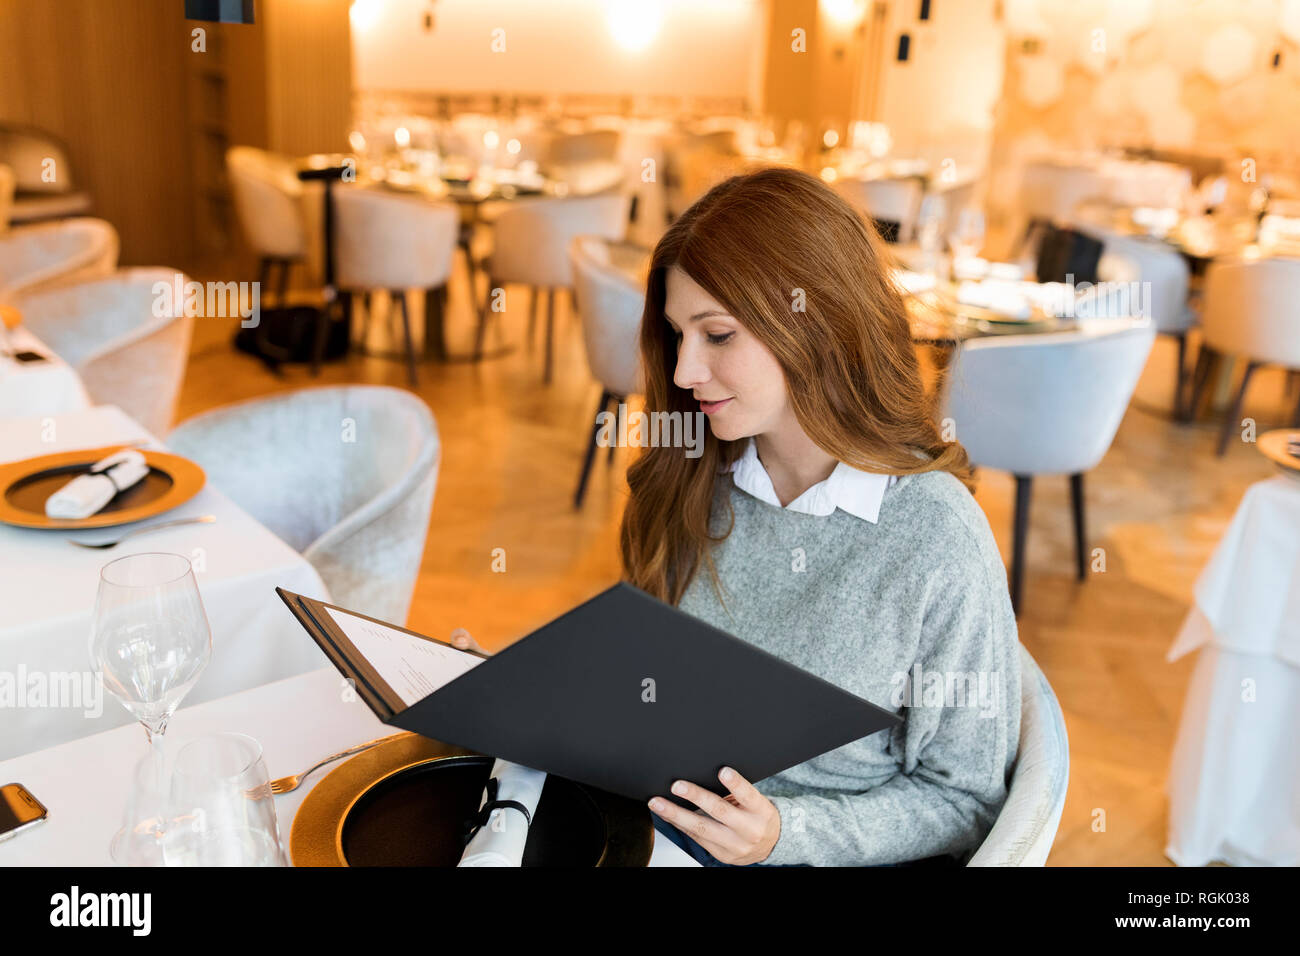 Woman sitting at table in a restaurant reading menu Stock Photo